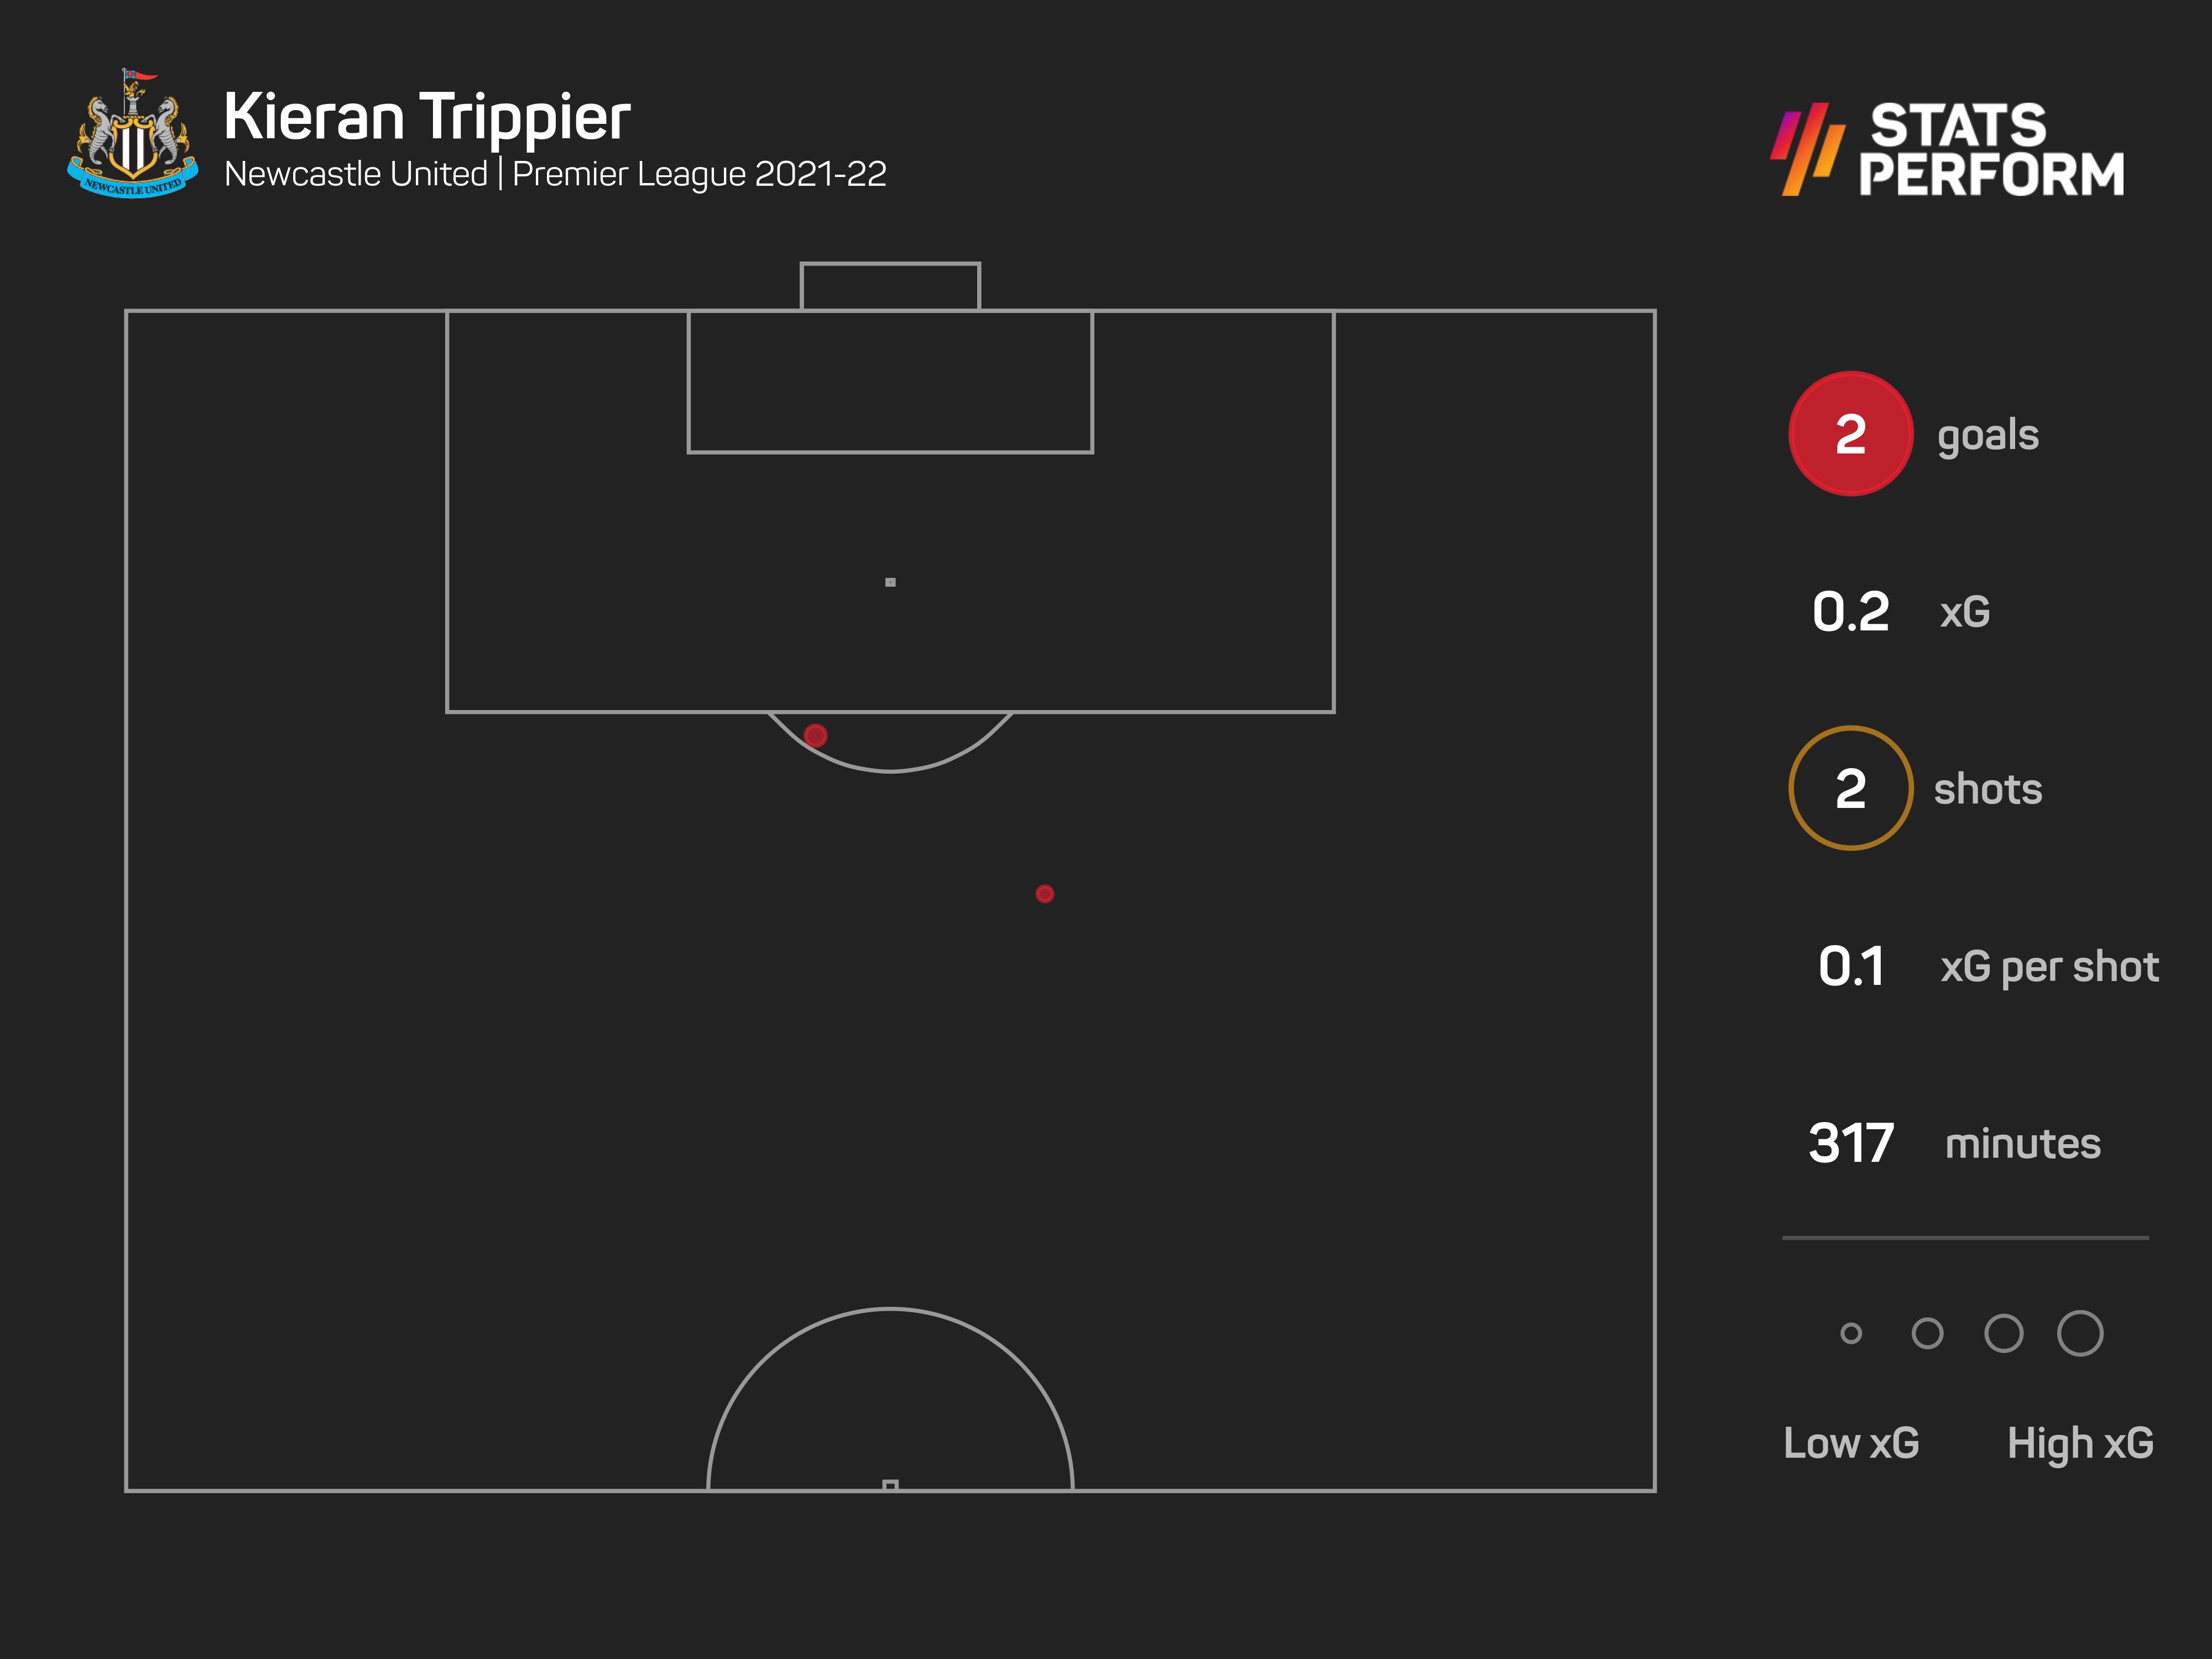 Kieran Trippier has scored from both of his shots in the league for Newcastle